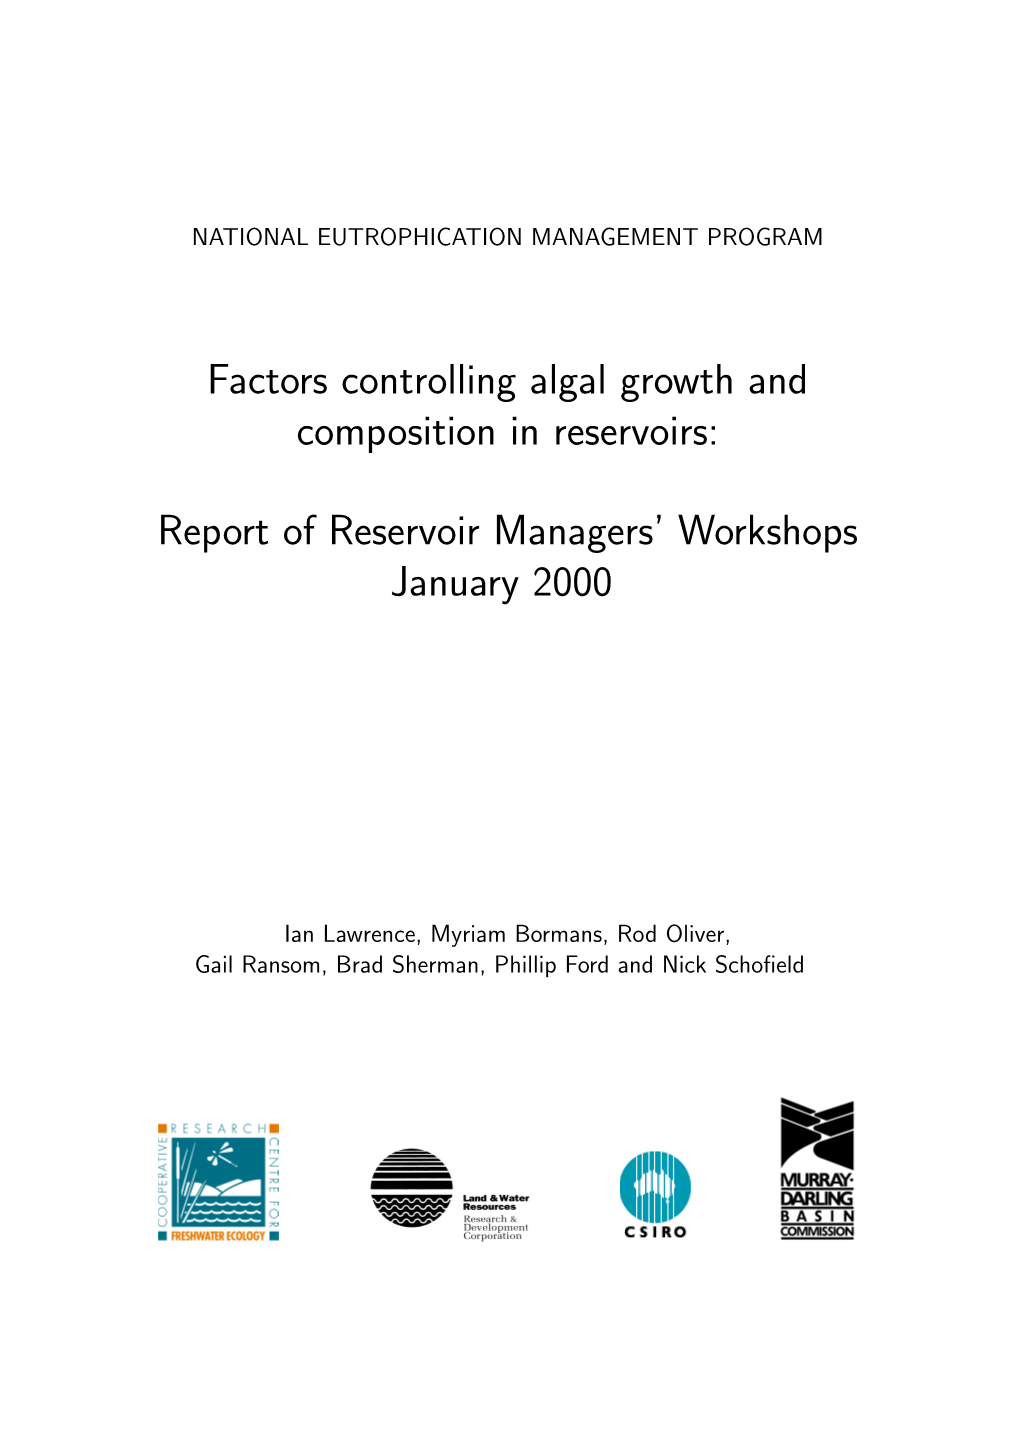 Factors Controlling Algal Growth and Composition in Reservoirs: Report Of